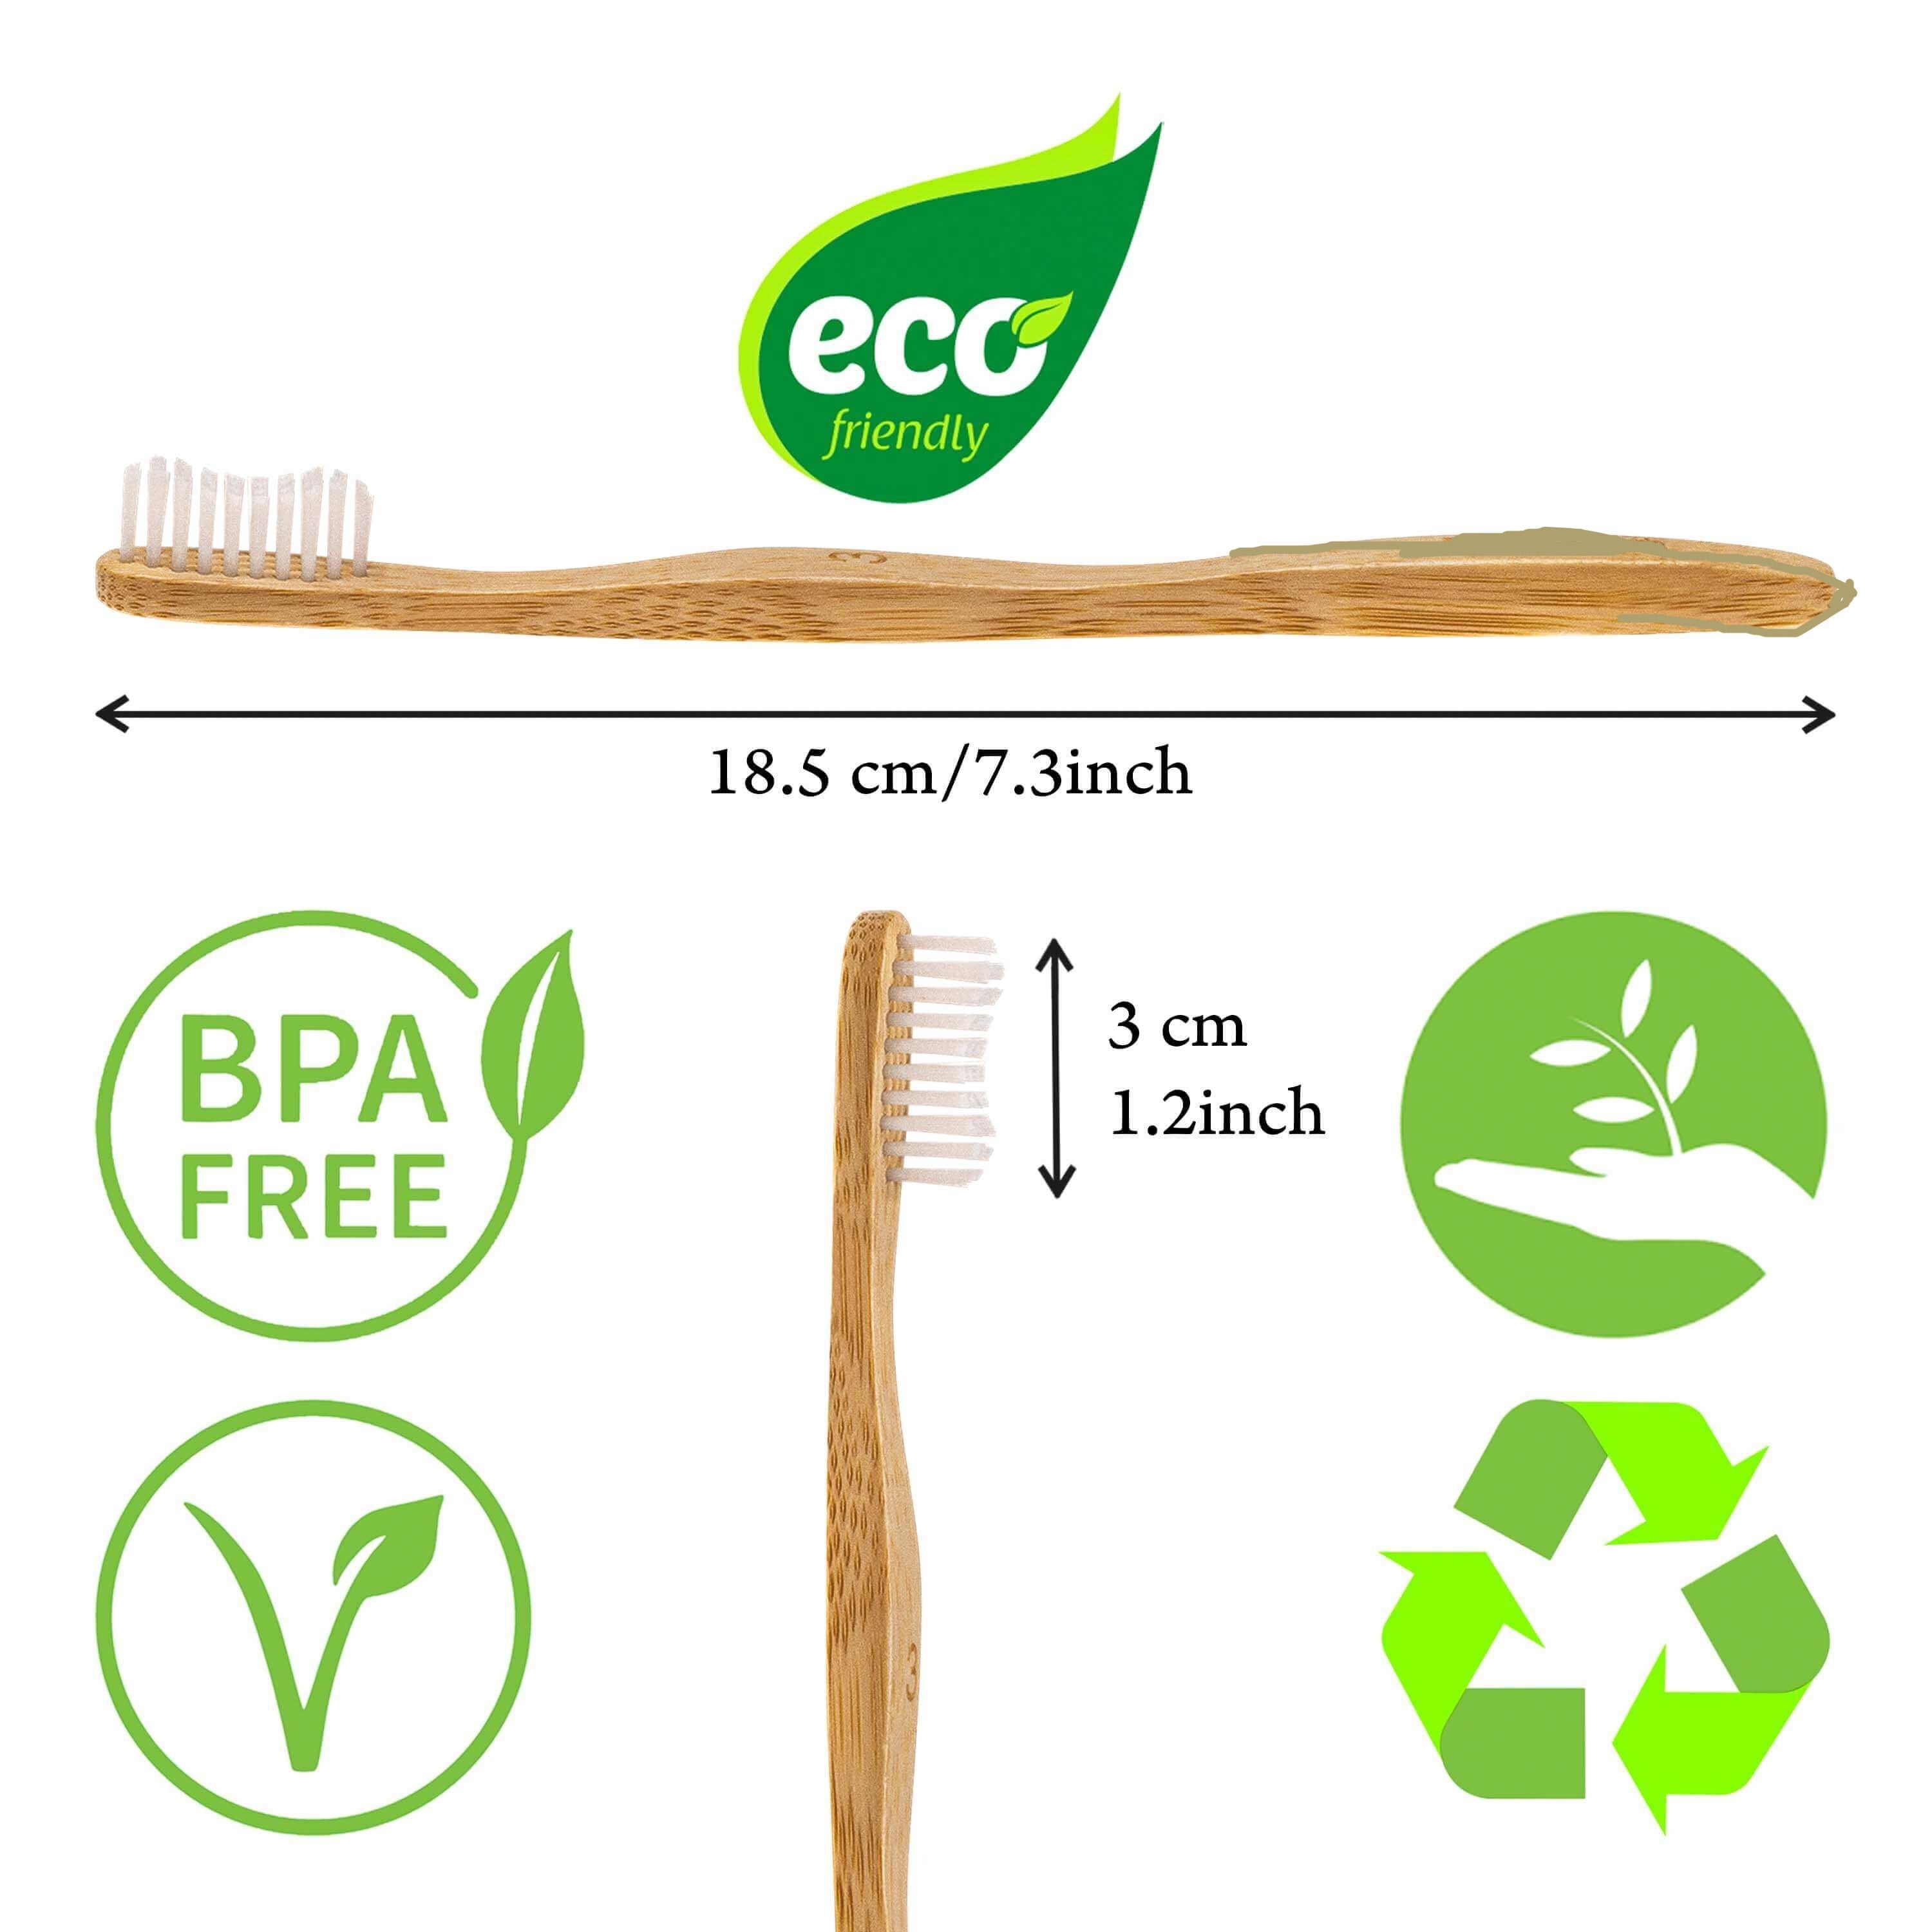 Bamboo Toothbrush Set 5-Pack - Bamboo Toothbrushes with Medium Bristles for Adults - Eco-Friendly, Biodegradable, Natural Wooden Toothbrushes-2